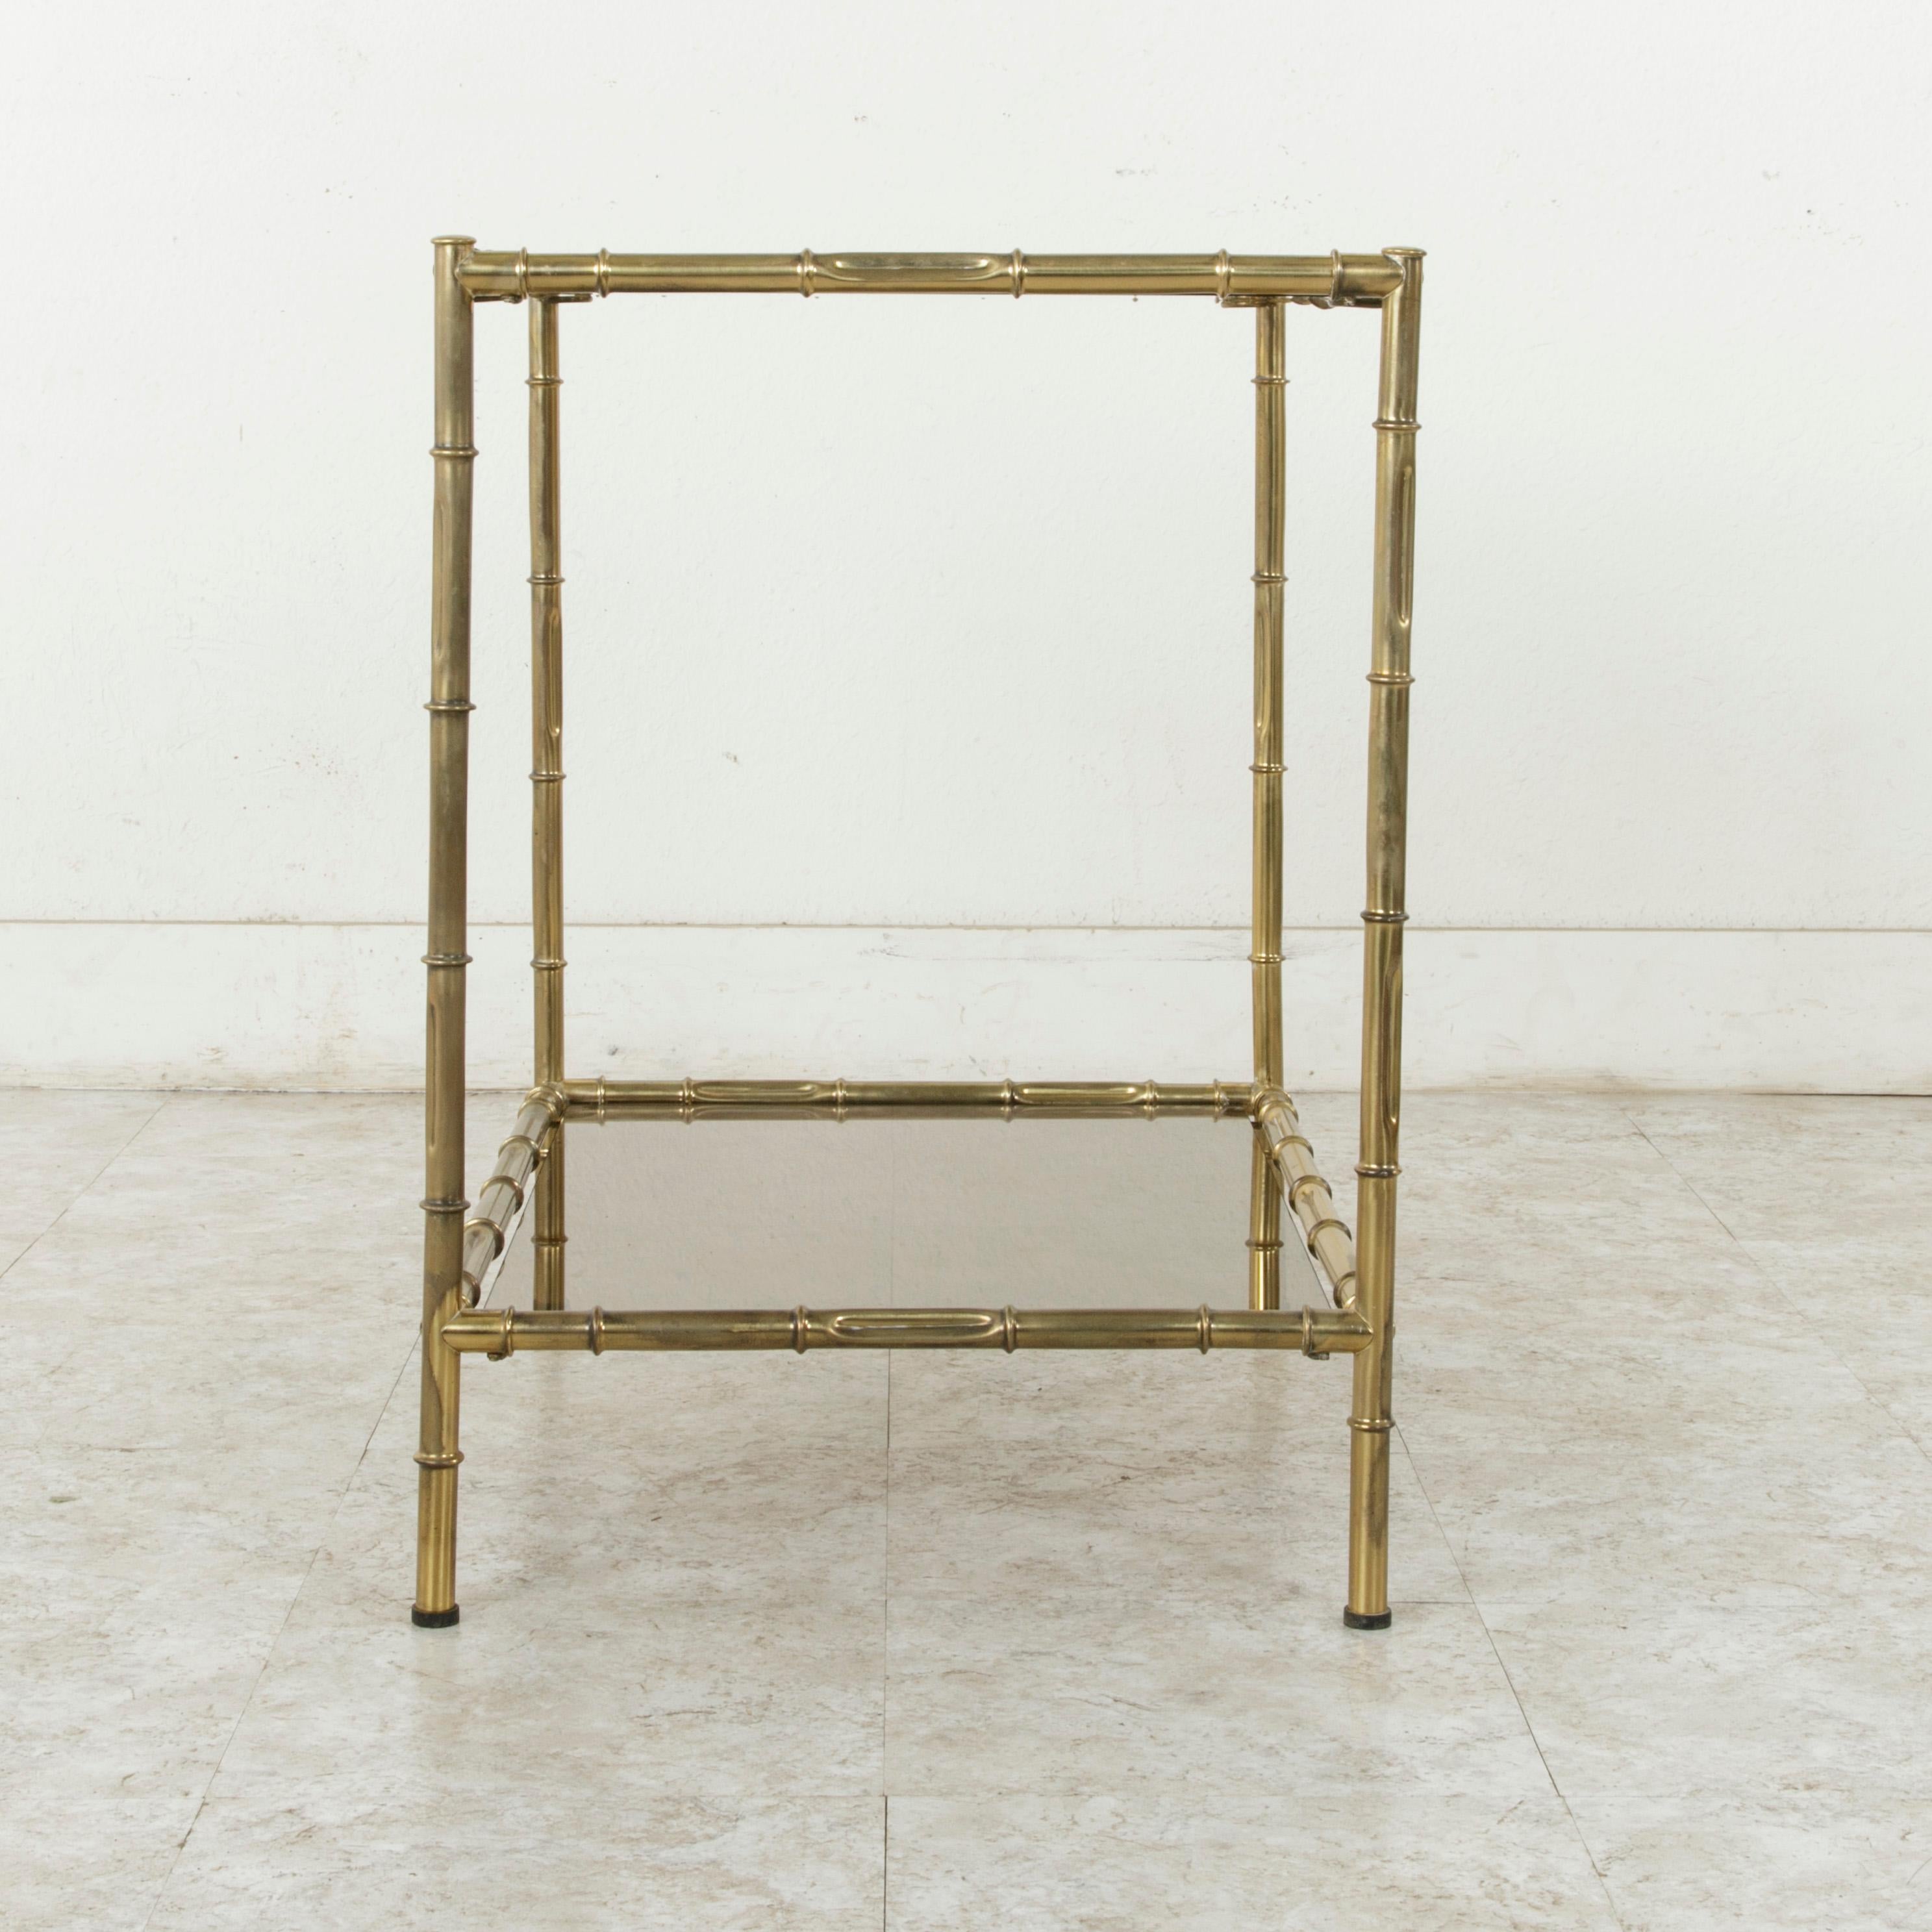 20th Century French Midcentury Faux Bamboo Brass Side Table with Smoked Glass Shelves